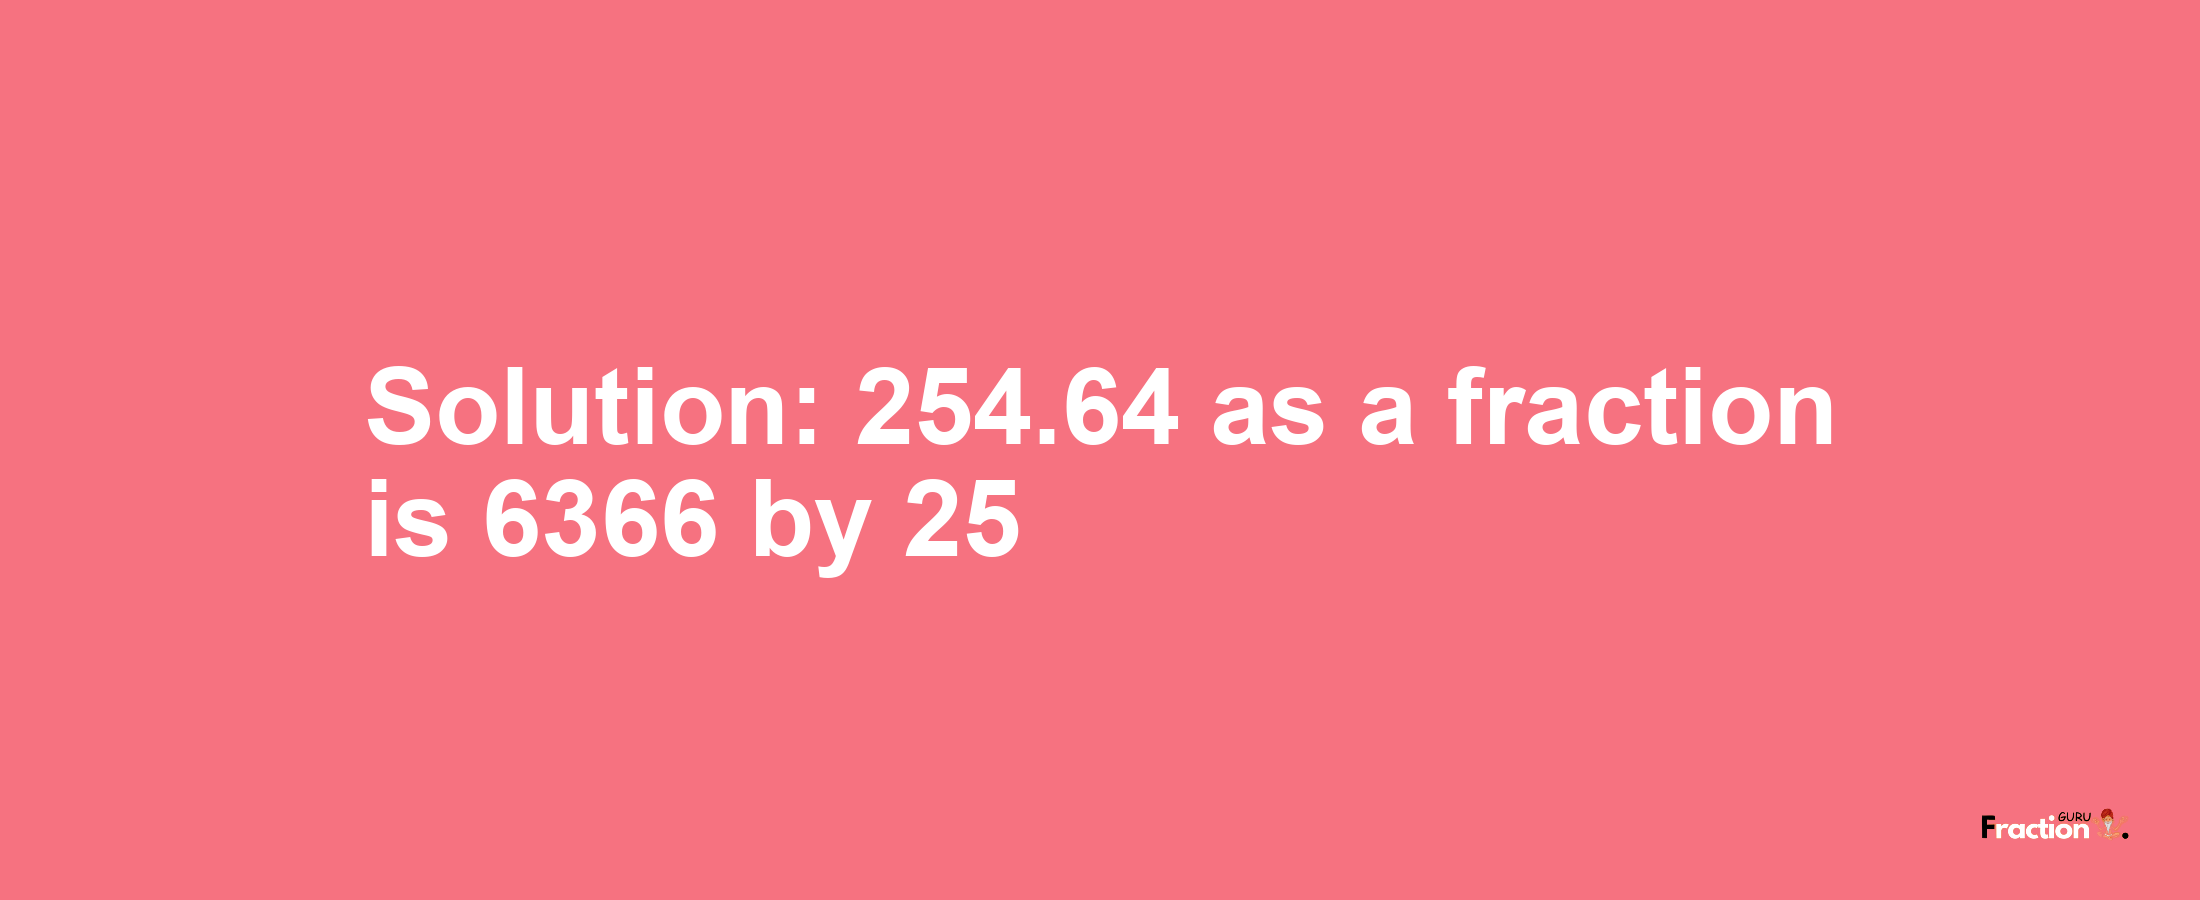 Solution:254.64 as a fraction is 6366/25